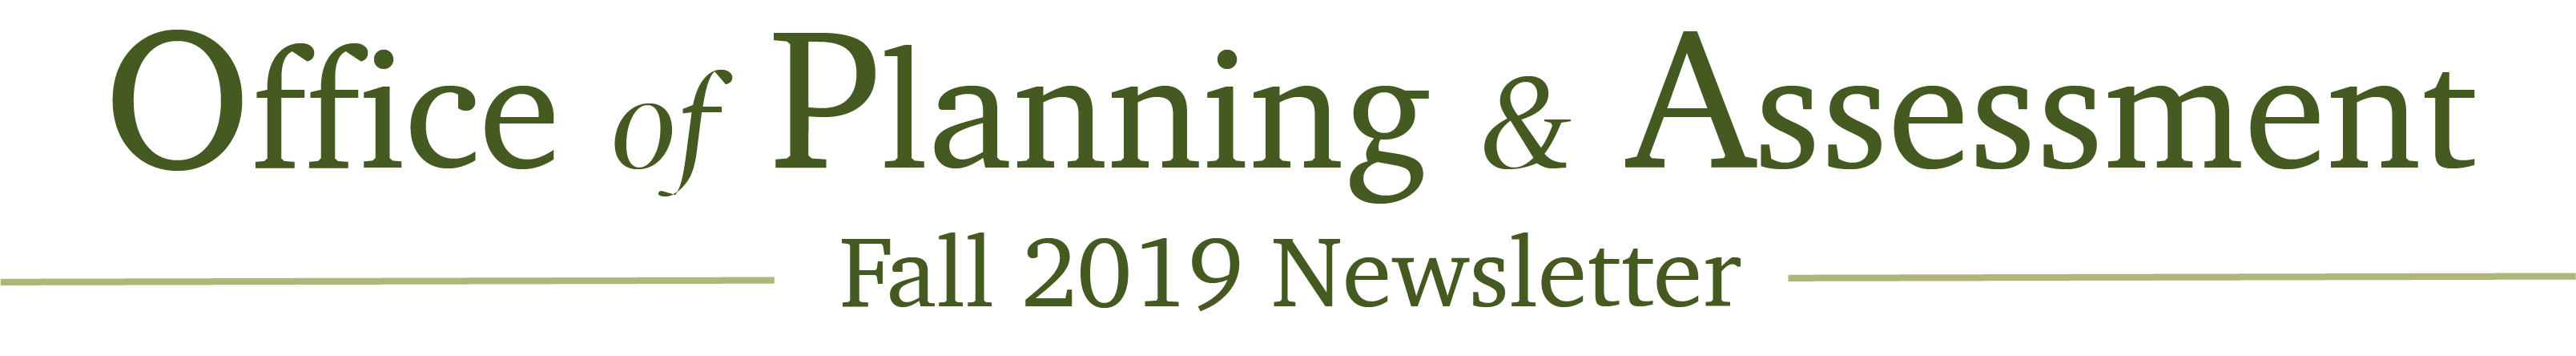 Office of Planning and Assessment Fall 2019 Newsletter